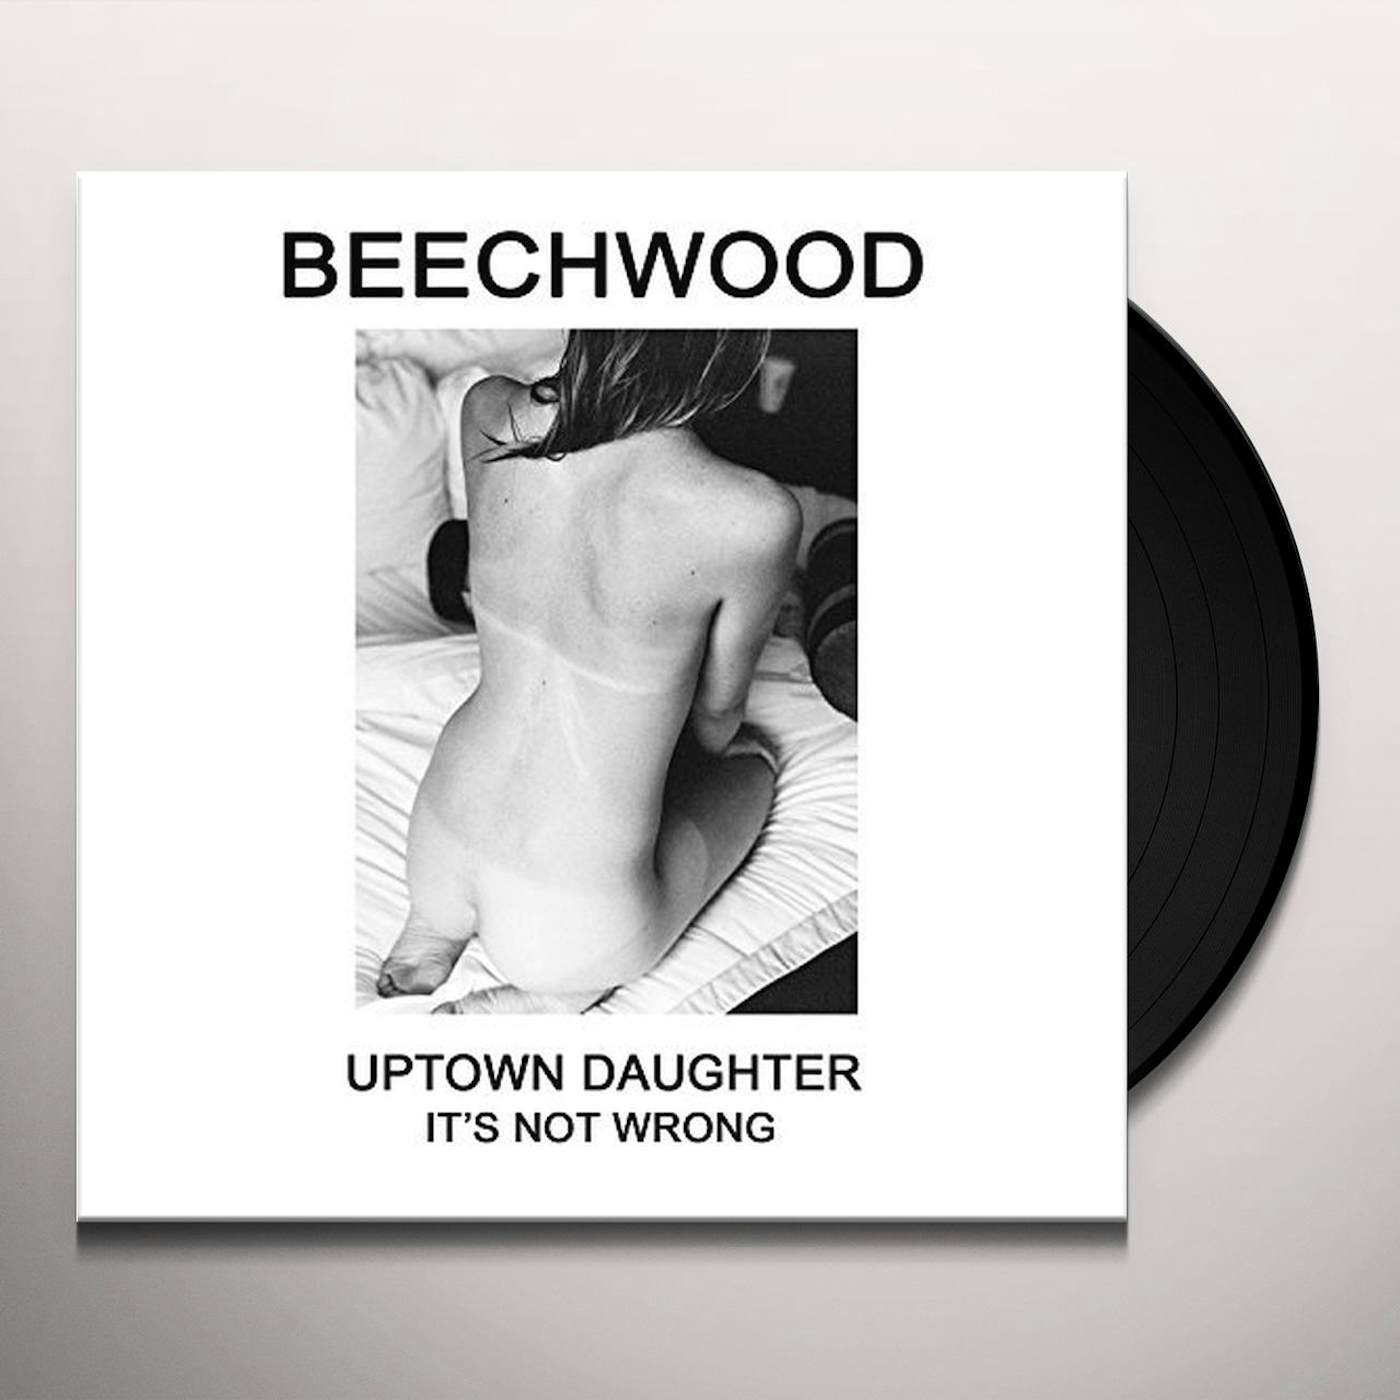 Beechwood ITS NOT WRONG B/W UPTOWN DAUGHTER Vinyl Record